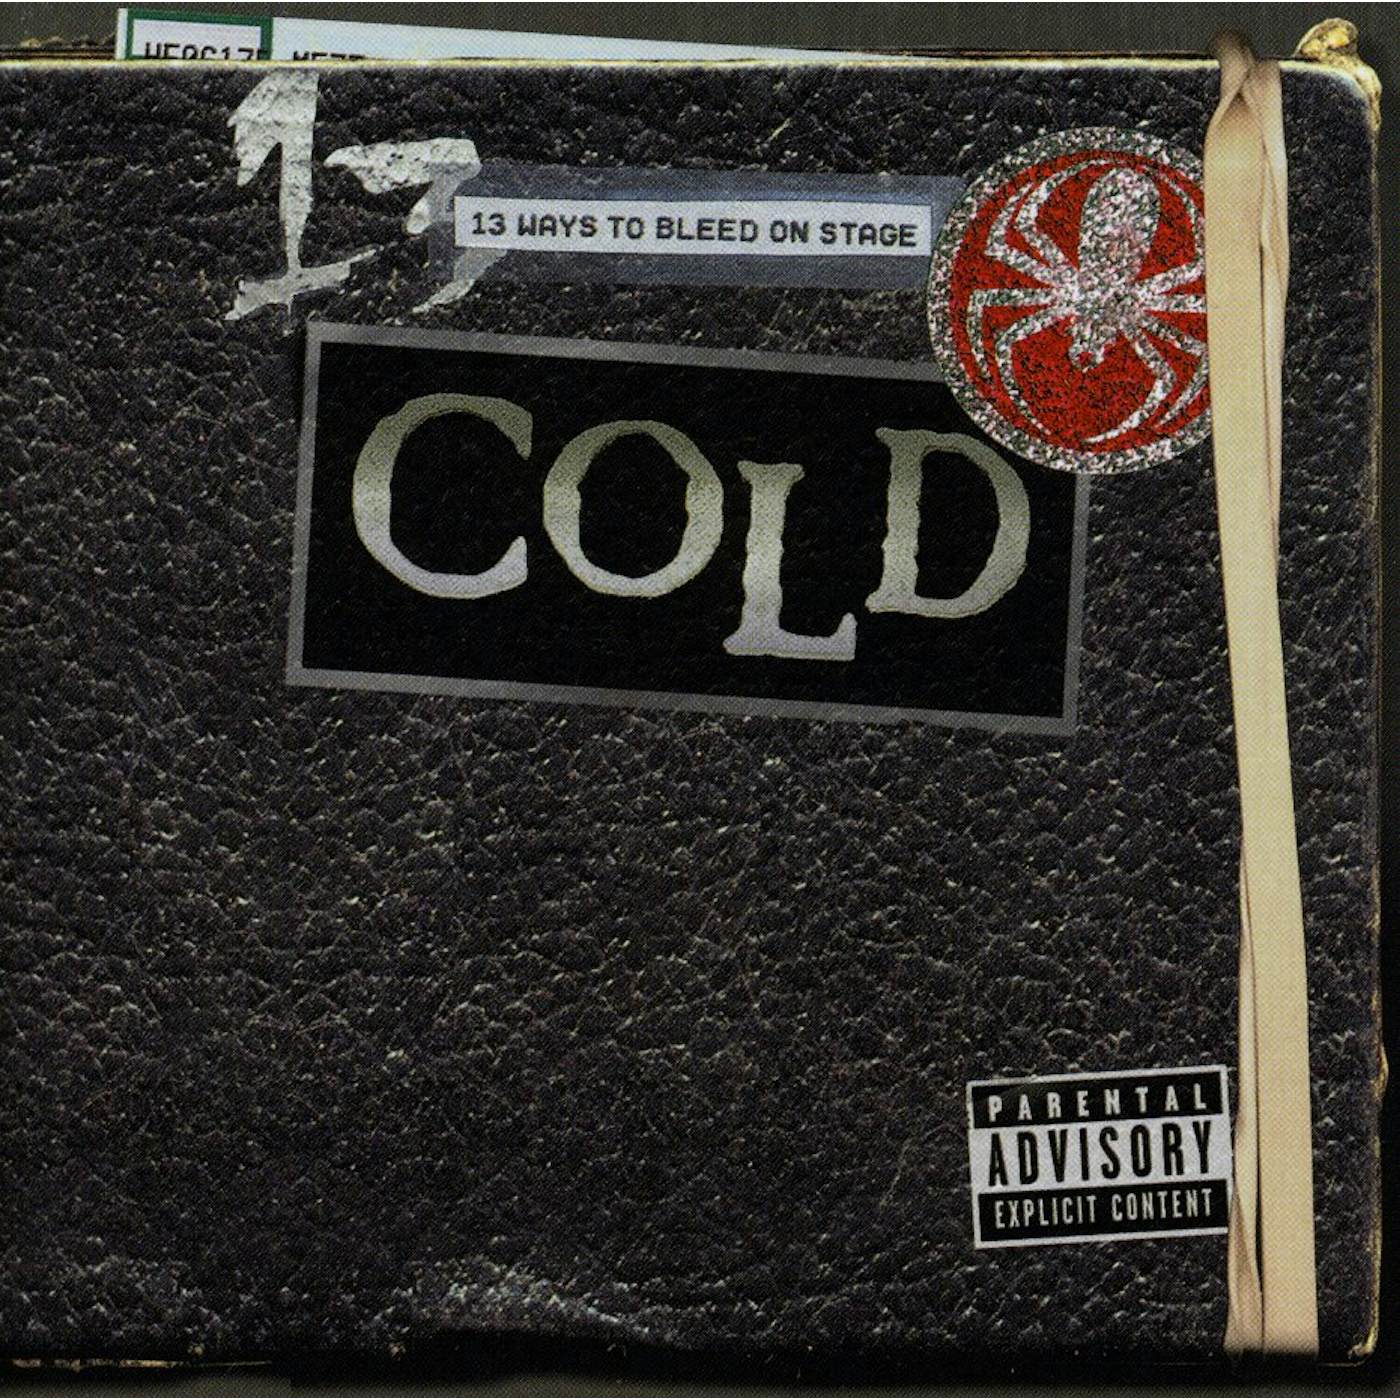 Cold 13 WAYS TO BLEED ON STAGE CD